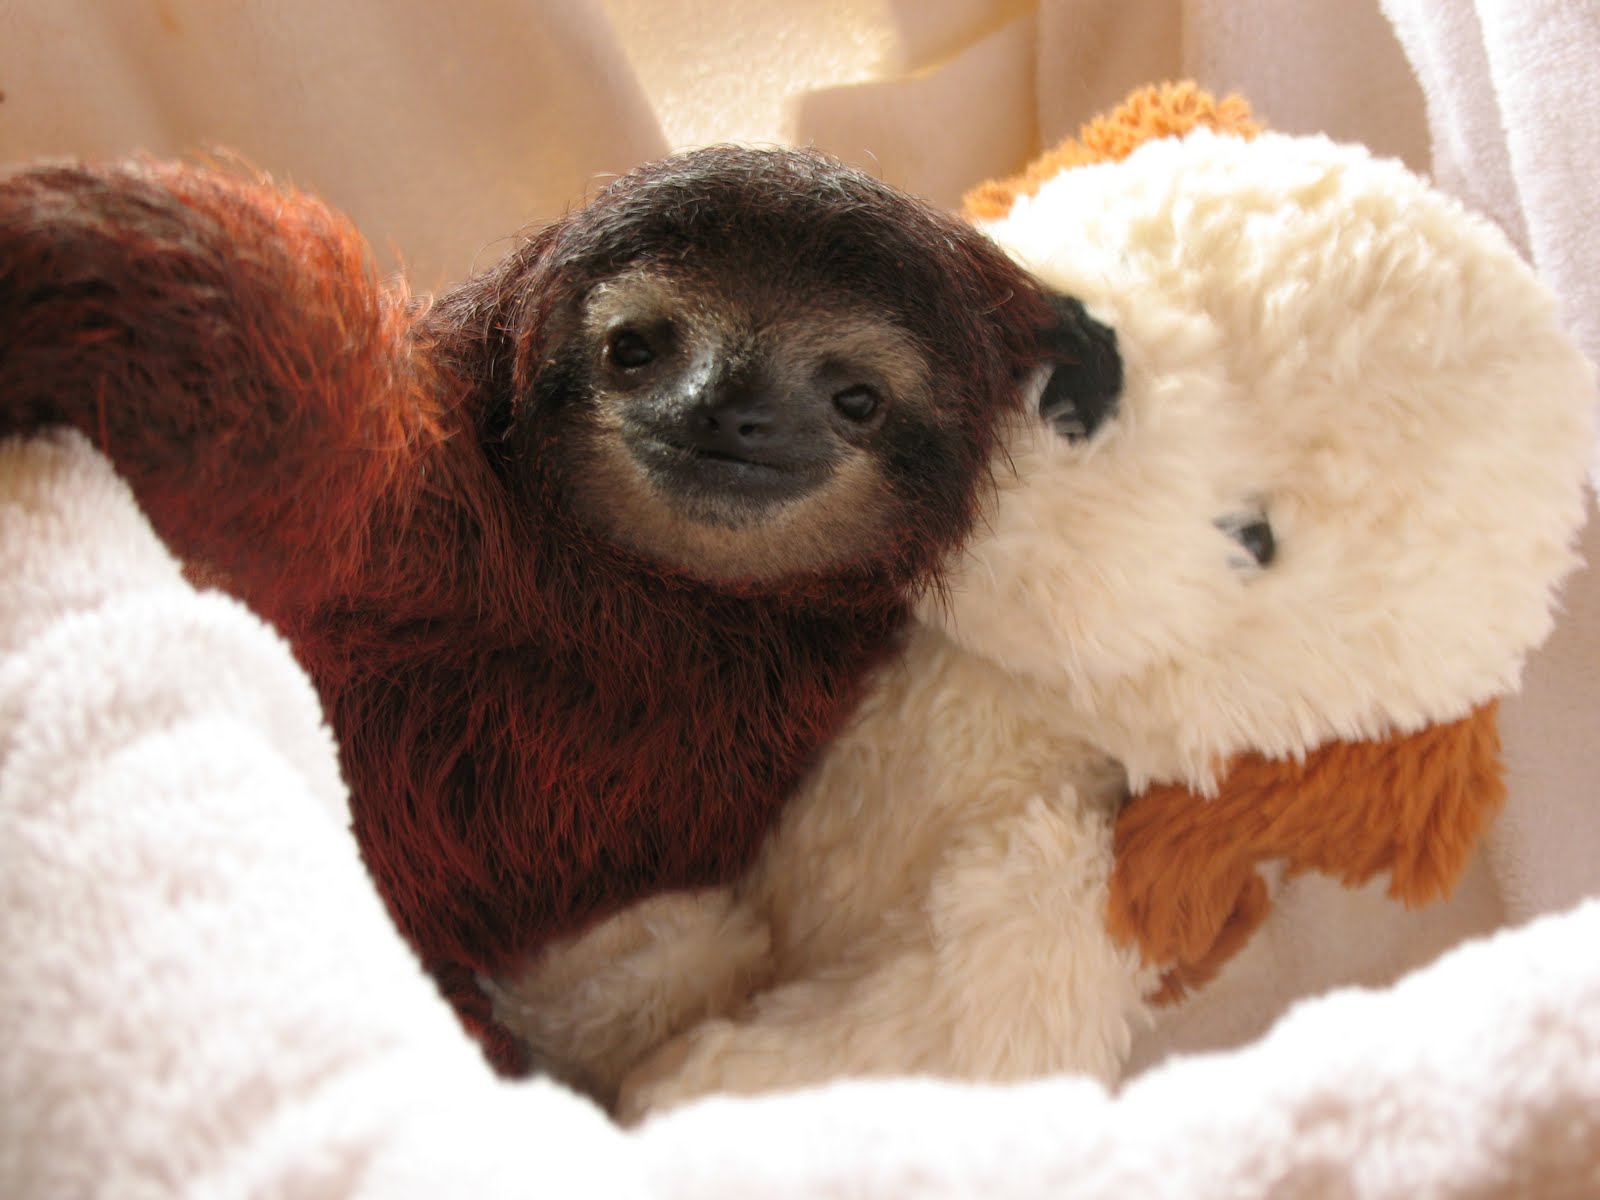 Download Cute Baby Sloth pictures in high definition or widescreen